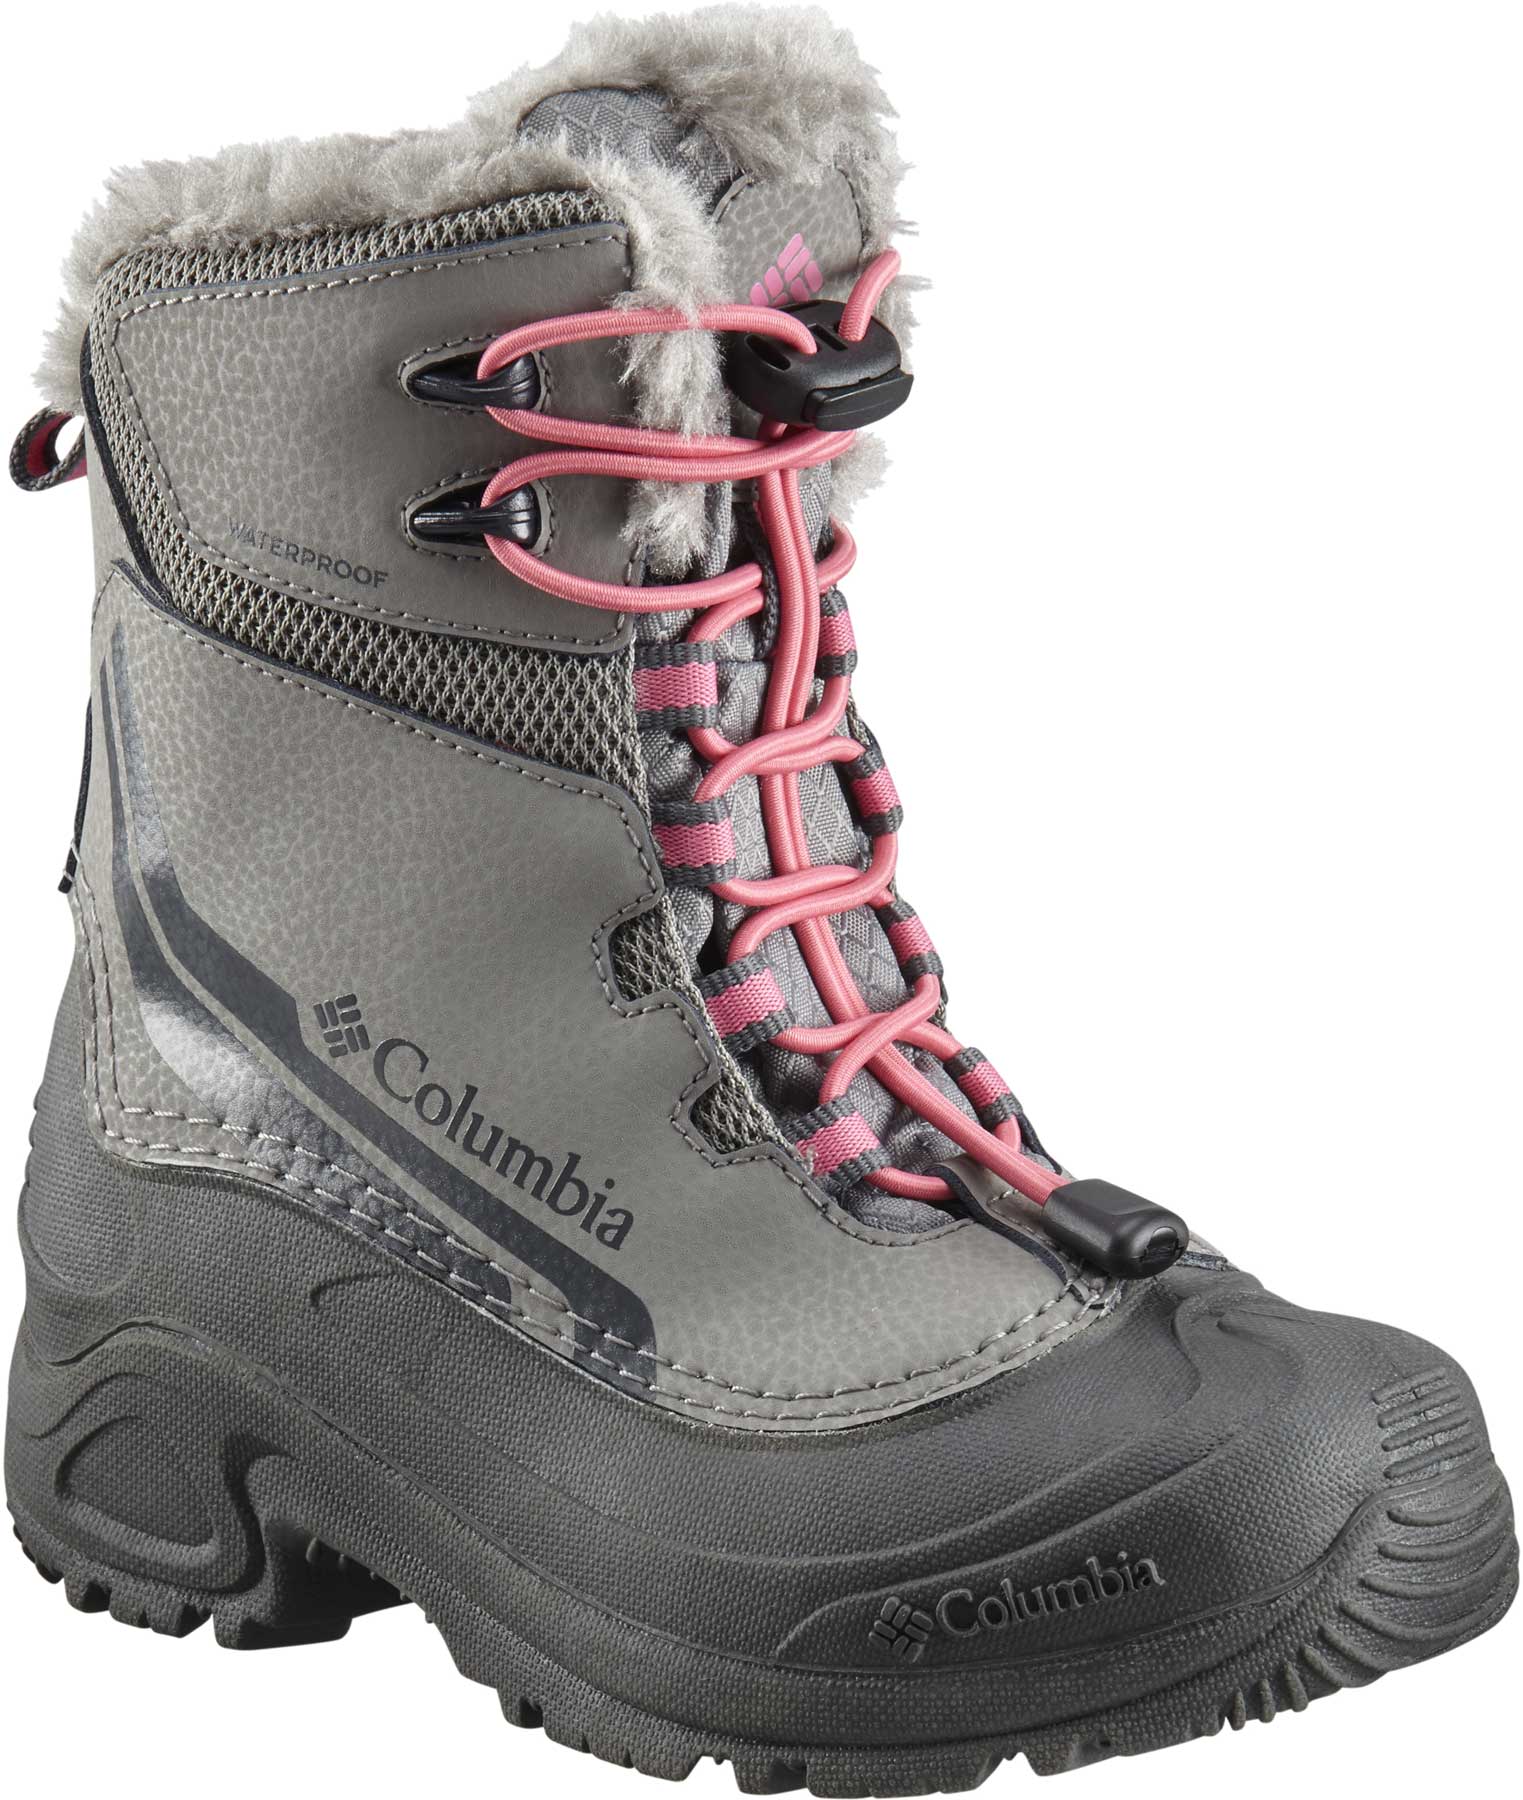 Girls’ outdoor shoes